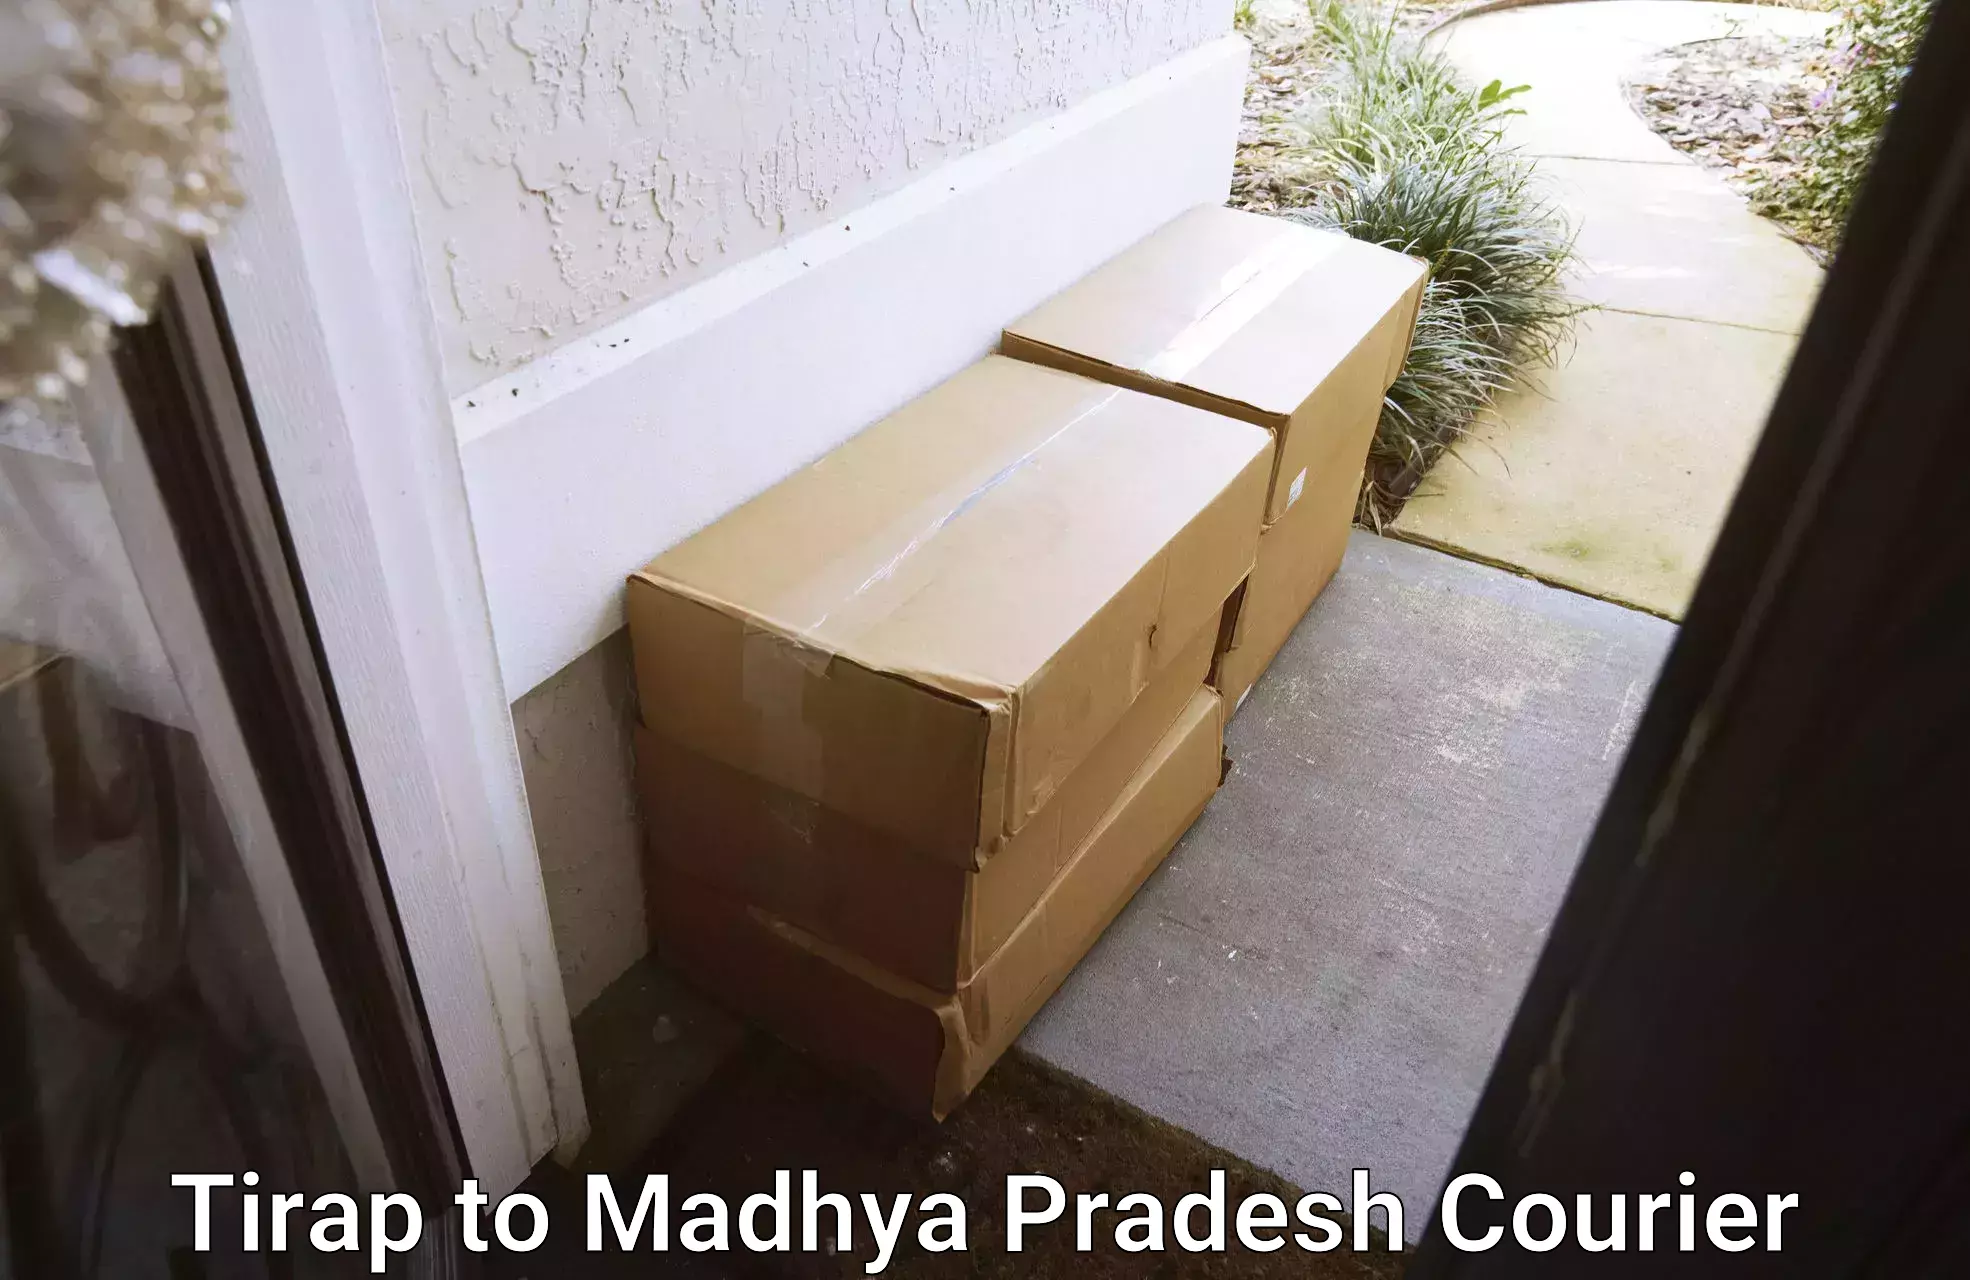 Sustainable delivery practices Tirap to Madhya Pradesh